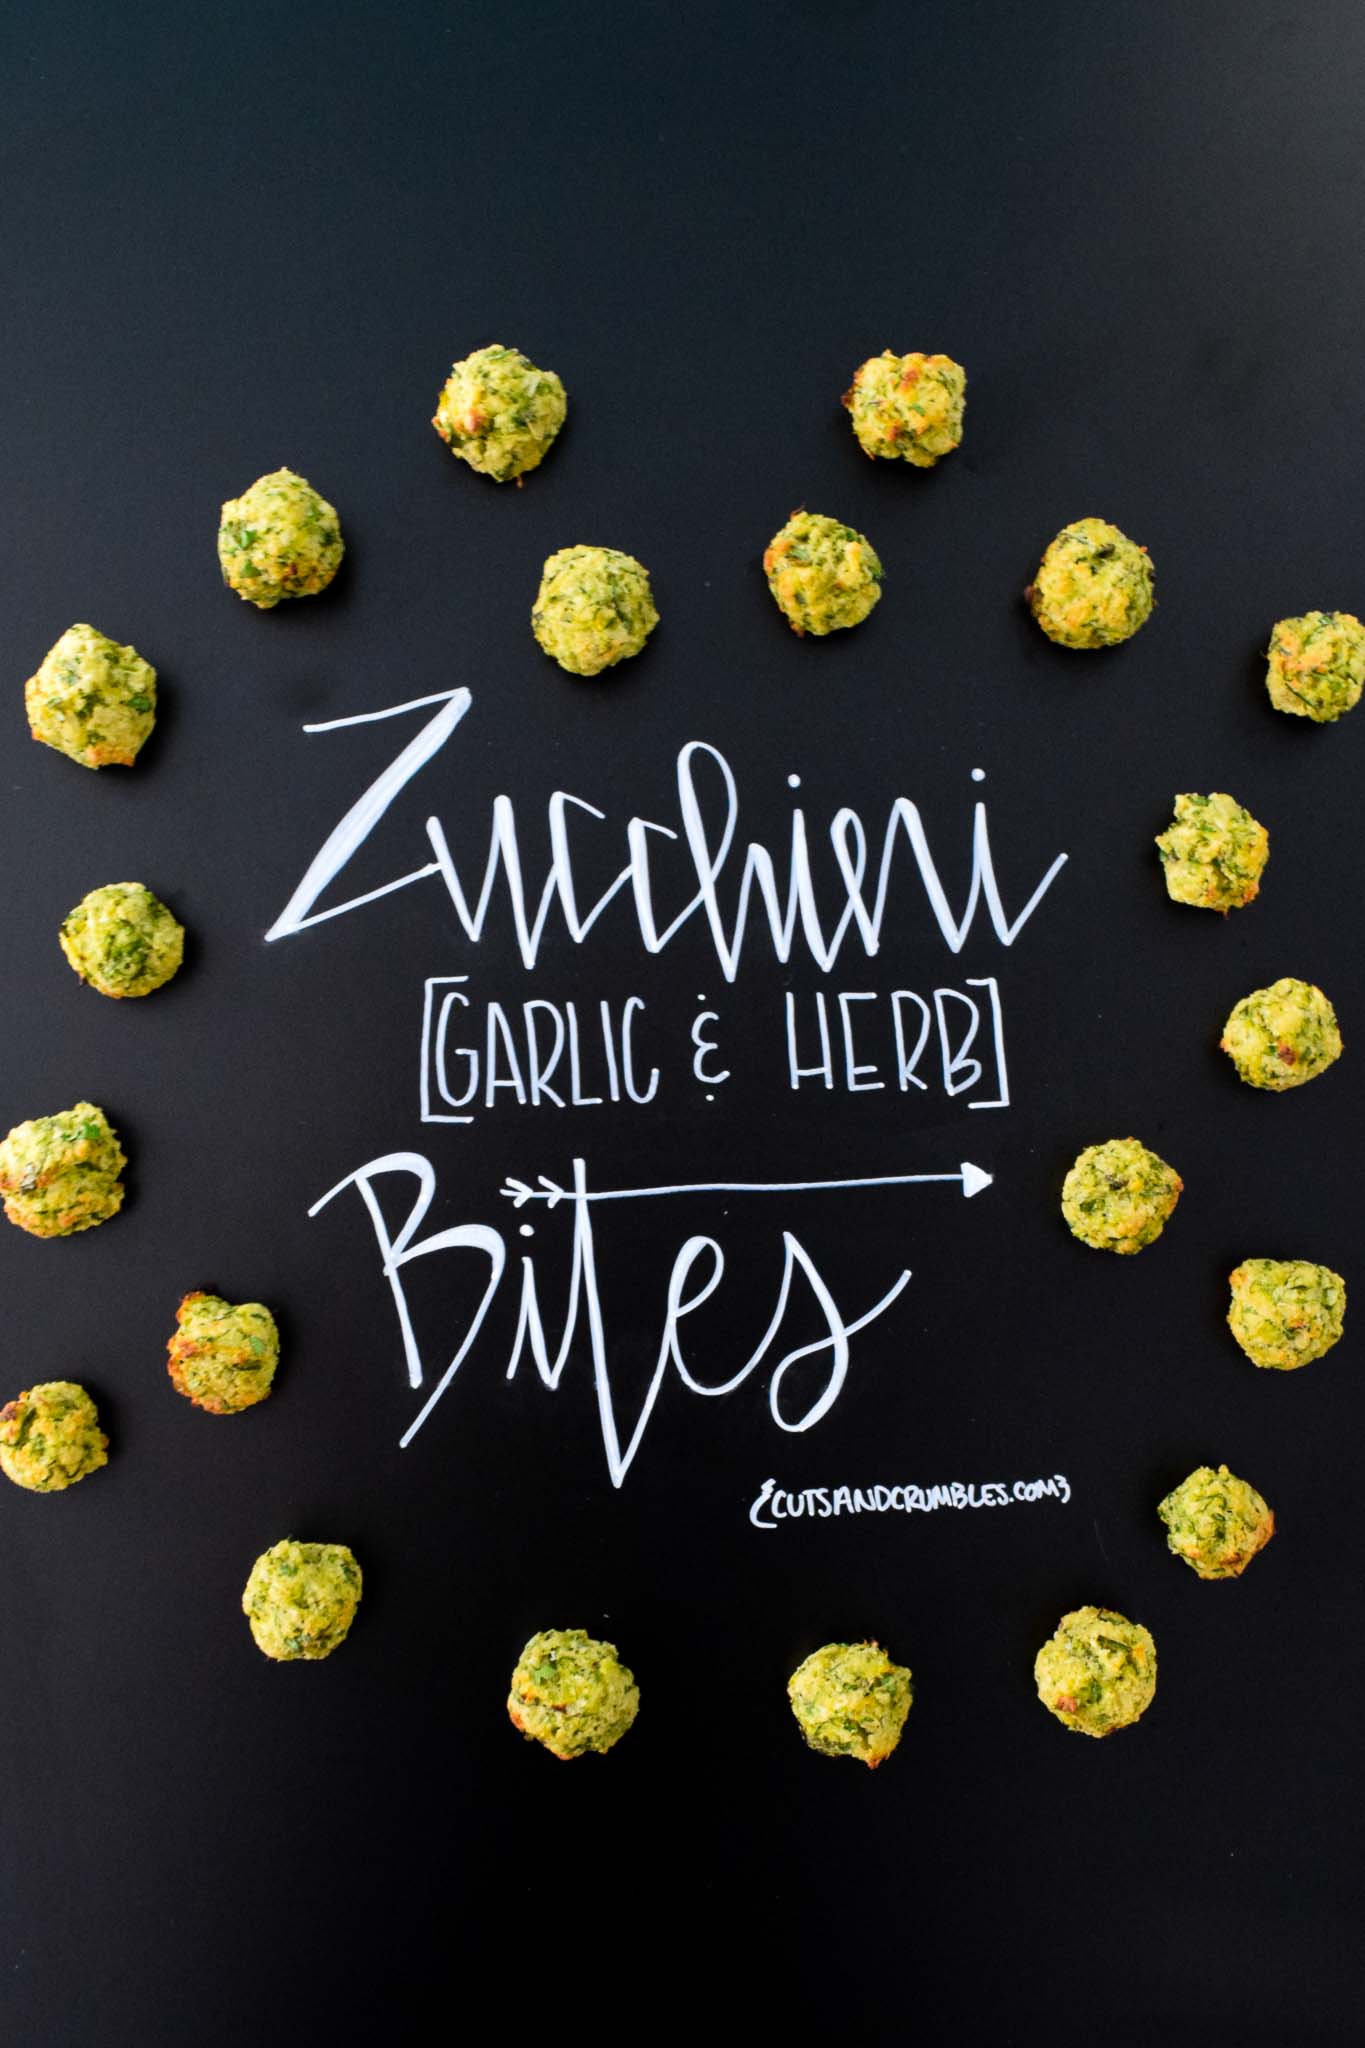 Zucchini Garlic and Herb Bites with title written on chalkboard